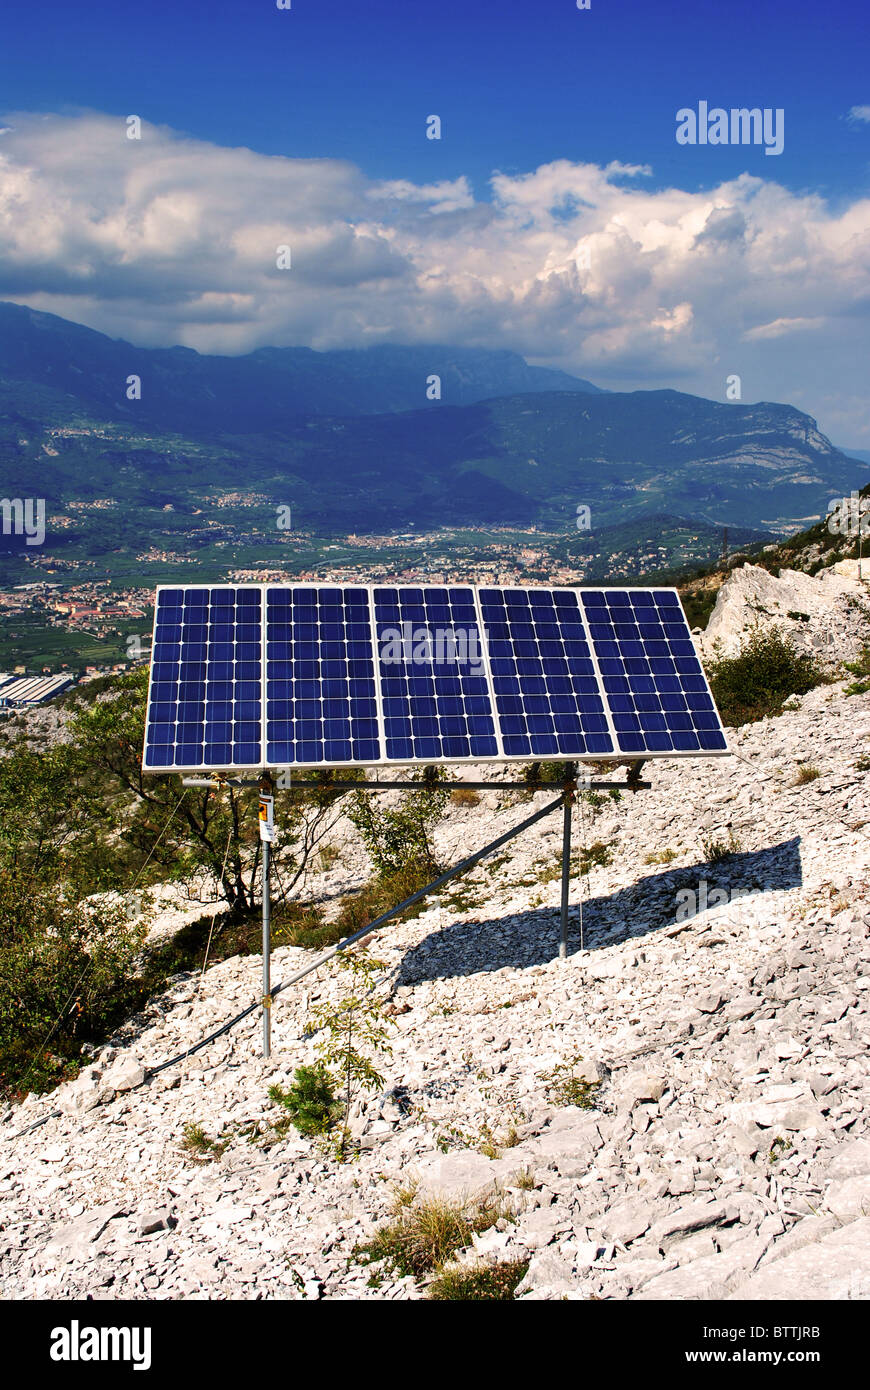 solar panel for electricity production in the high mountains Stock Photo